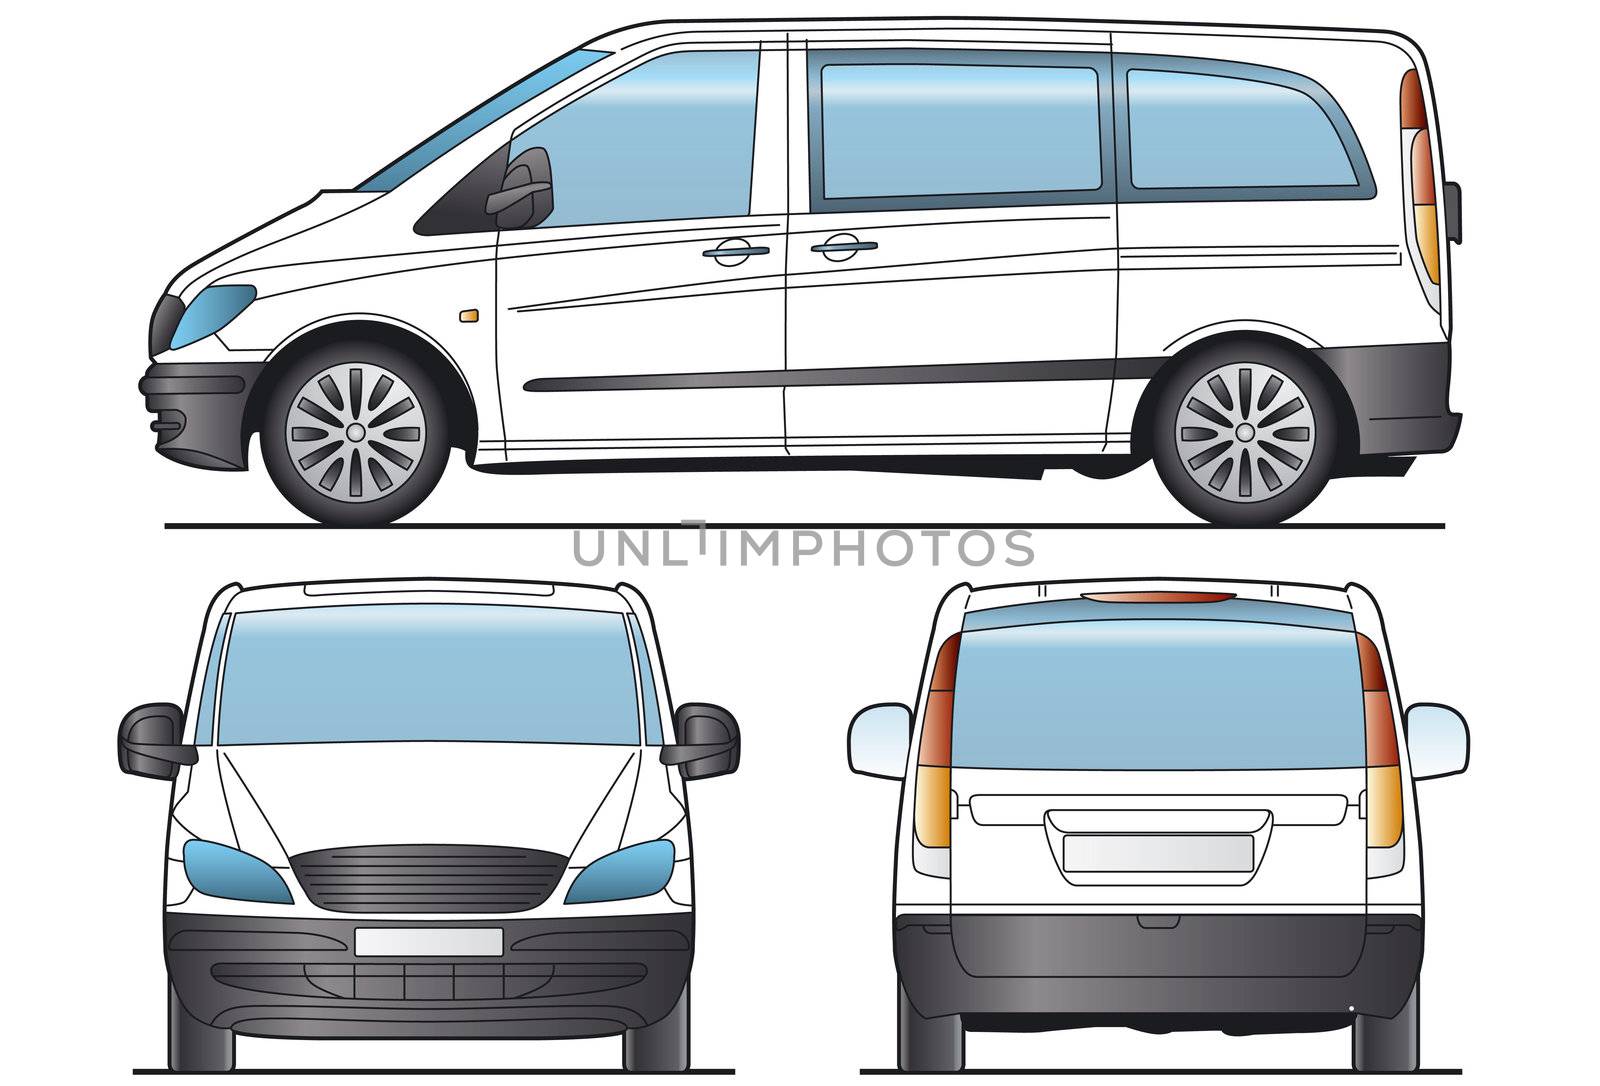 Taxi Minibus, Car Template by faberfoto